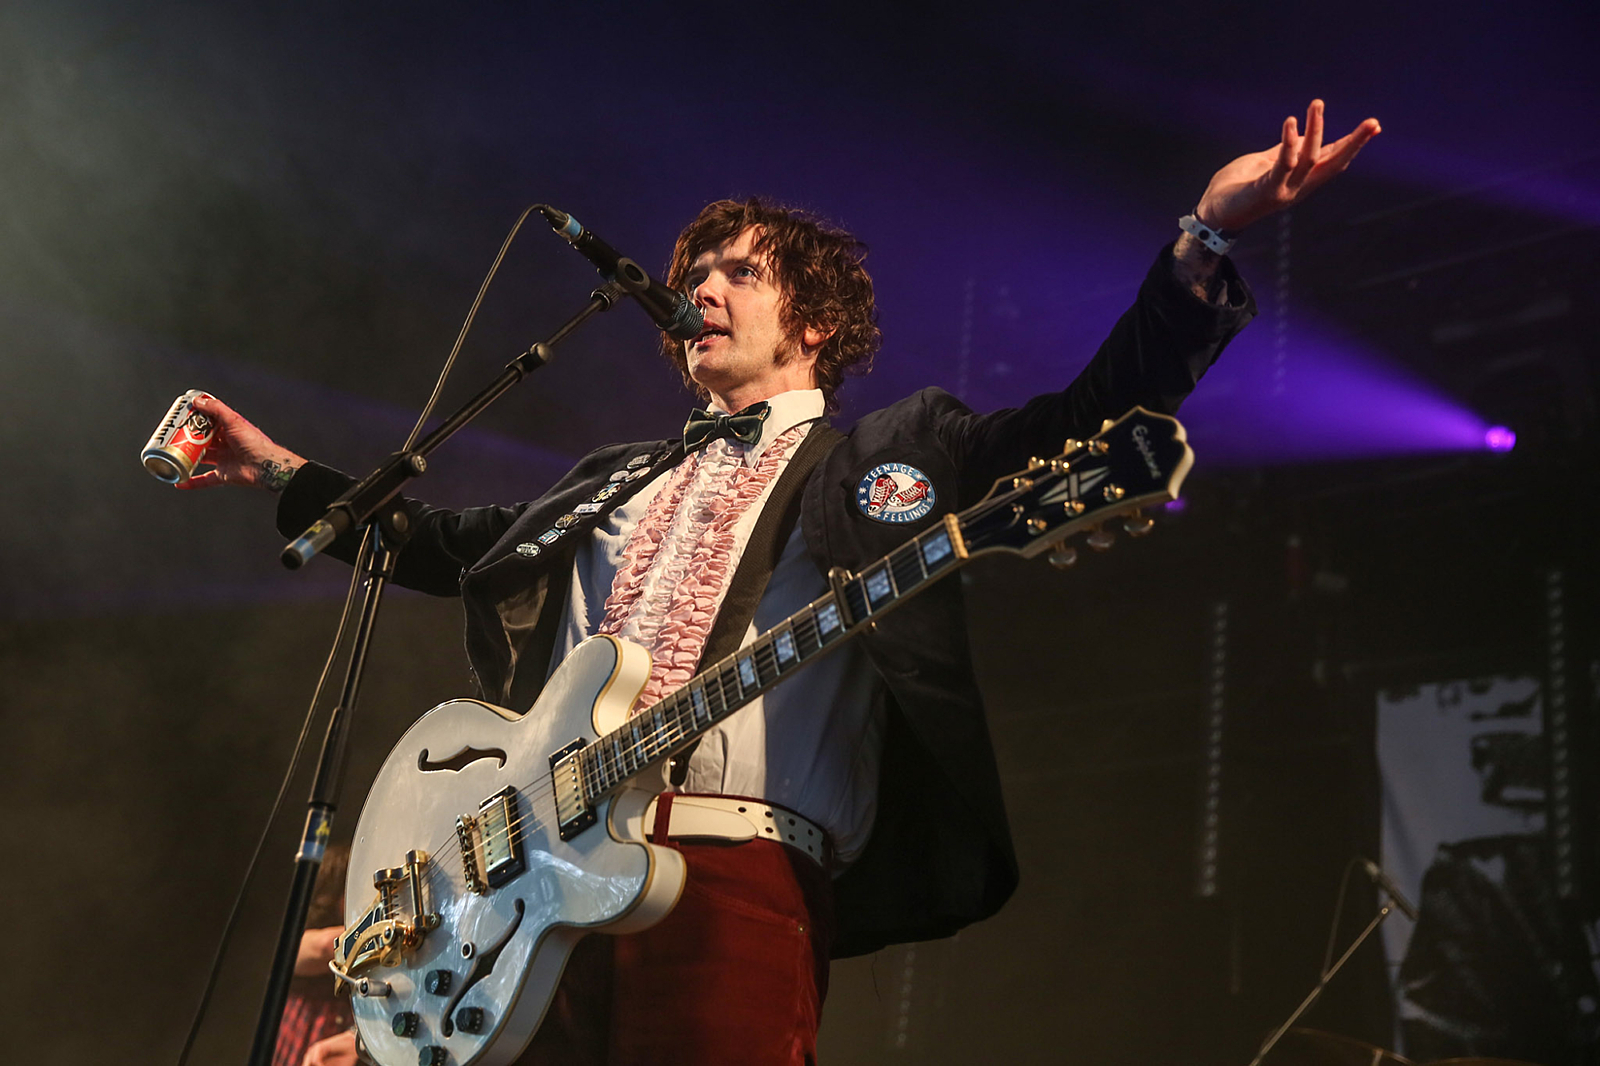 Beach Slang are releasing an EP of reworked tracks under the name Quiet Slang